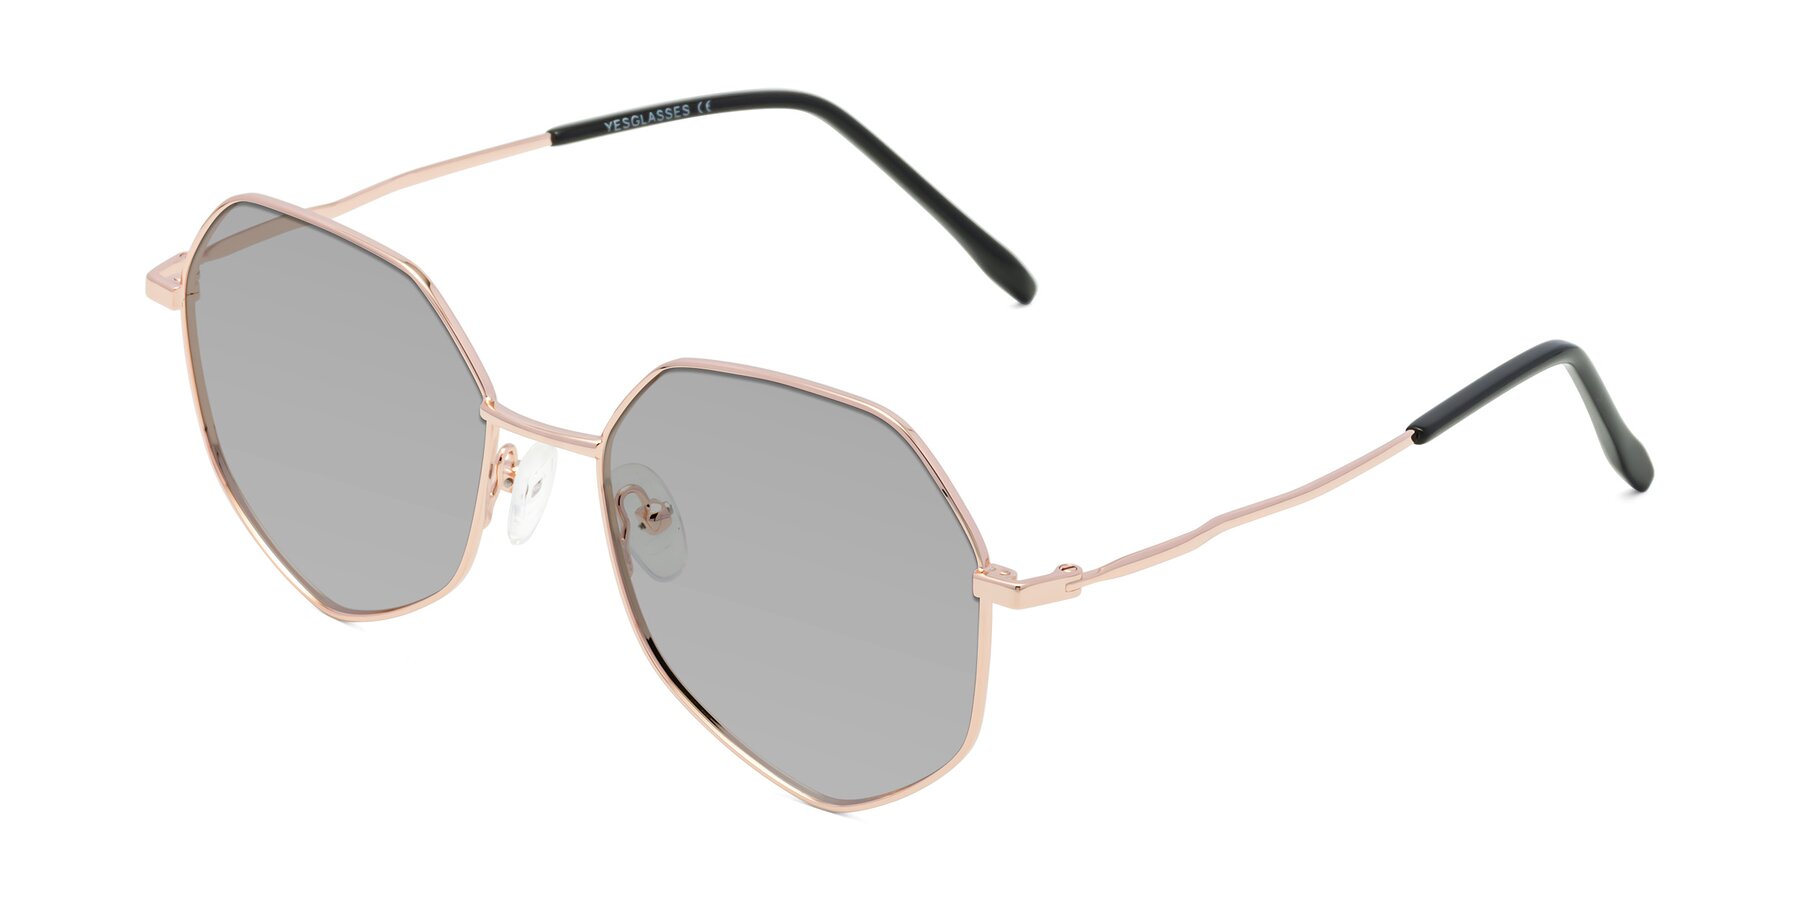 Angle of Sunshine in Rose Gold with Light Gray Tinted Lenses